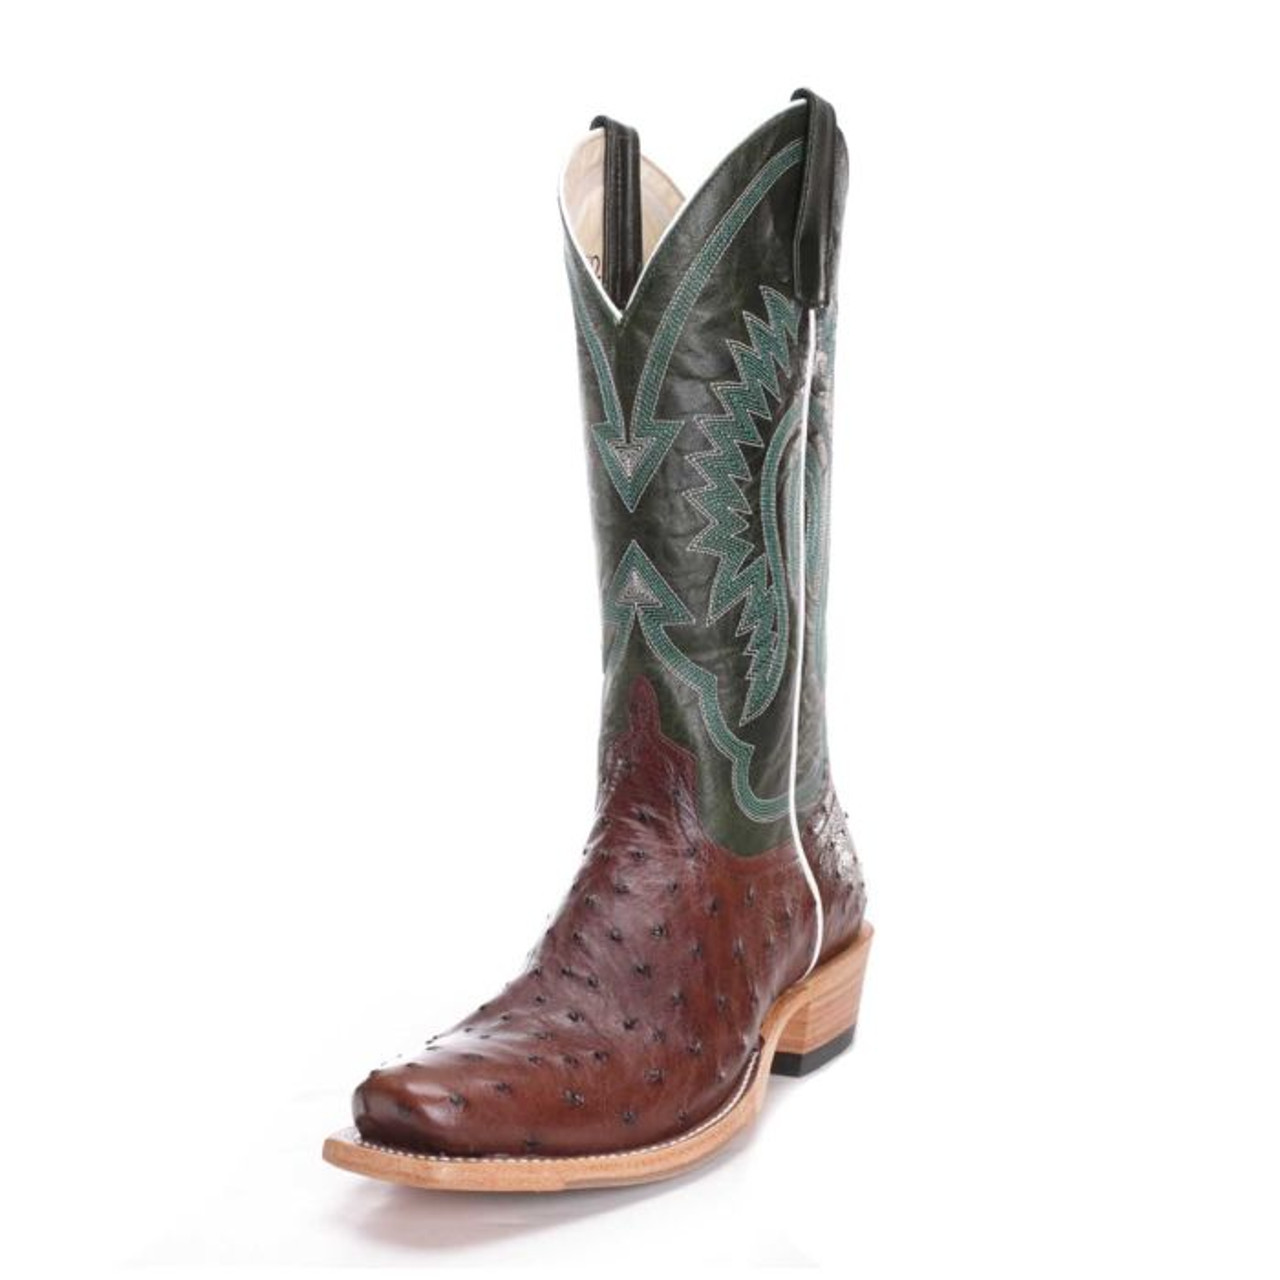 Are Cowboy Boots In Style? Cowboy Boots from Day to Night, Sydne Style